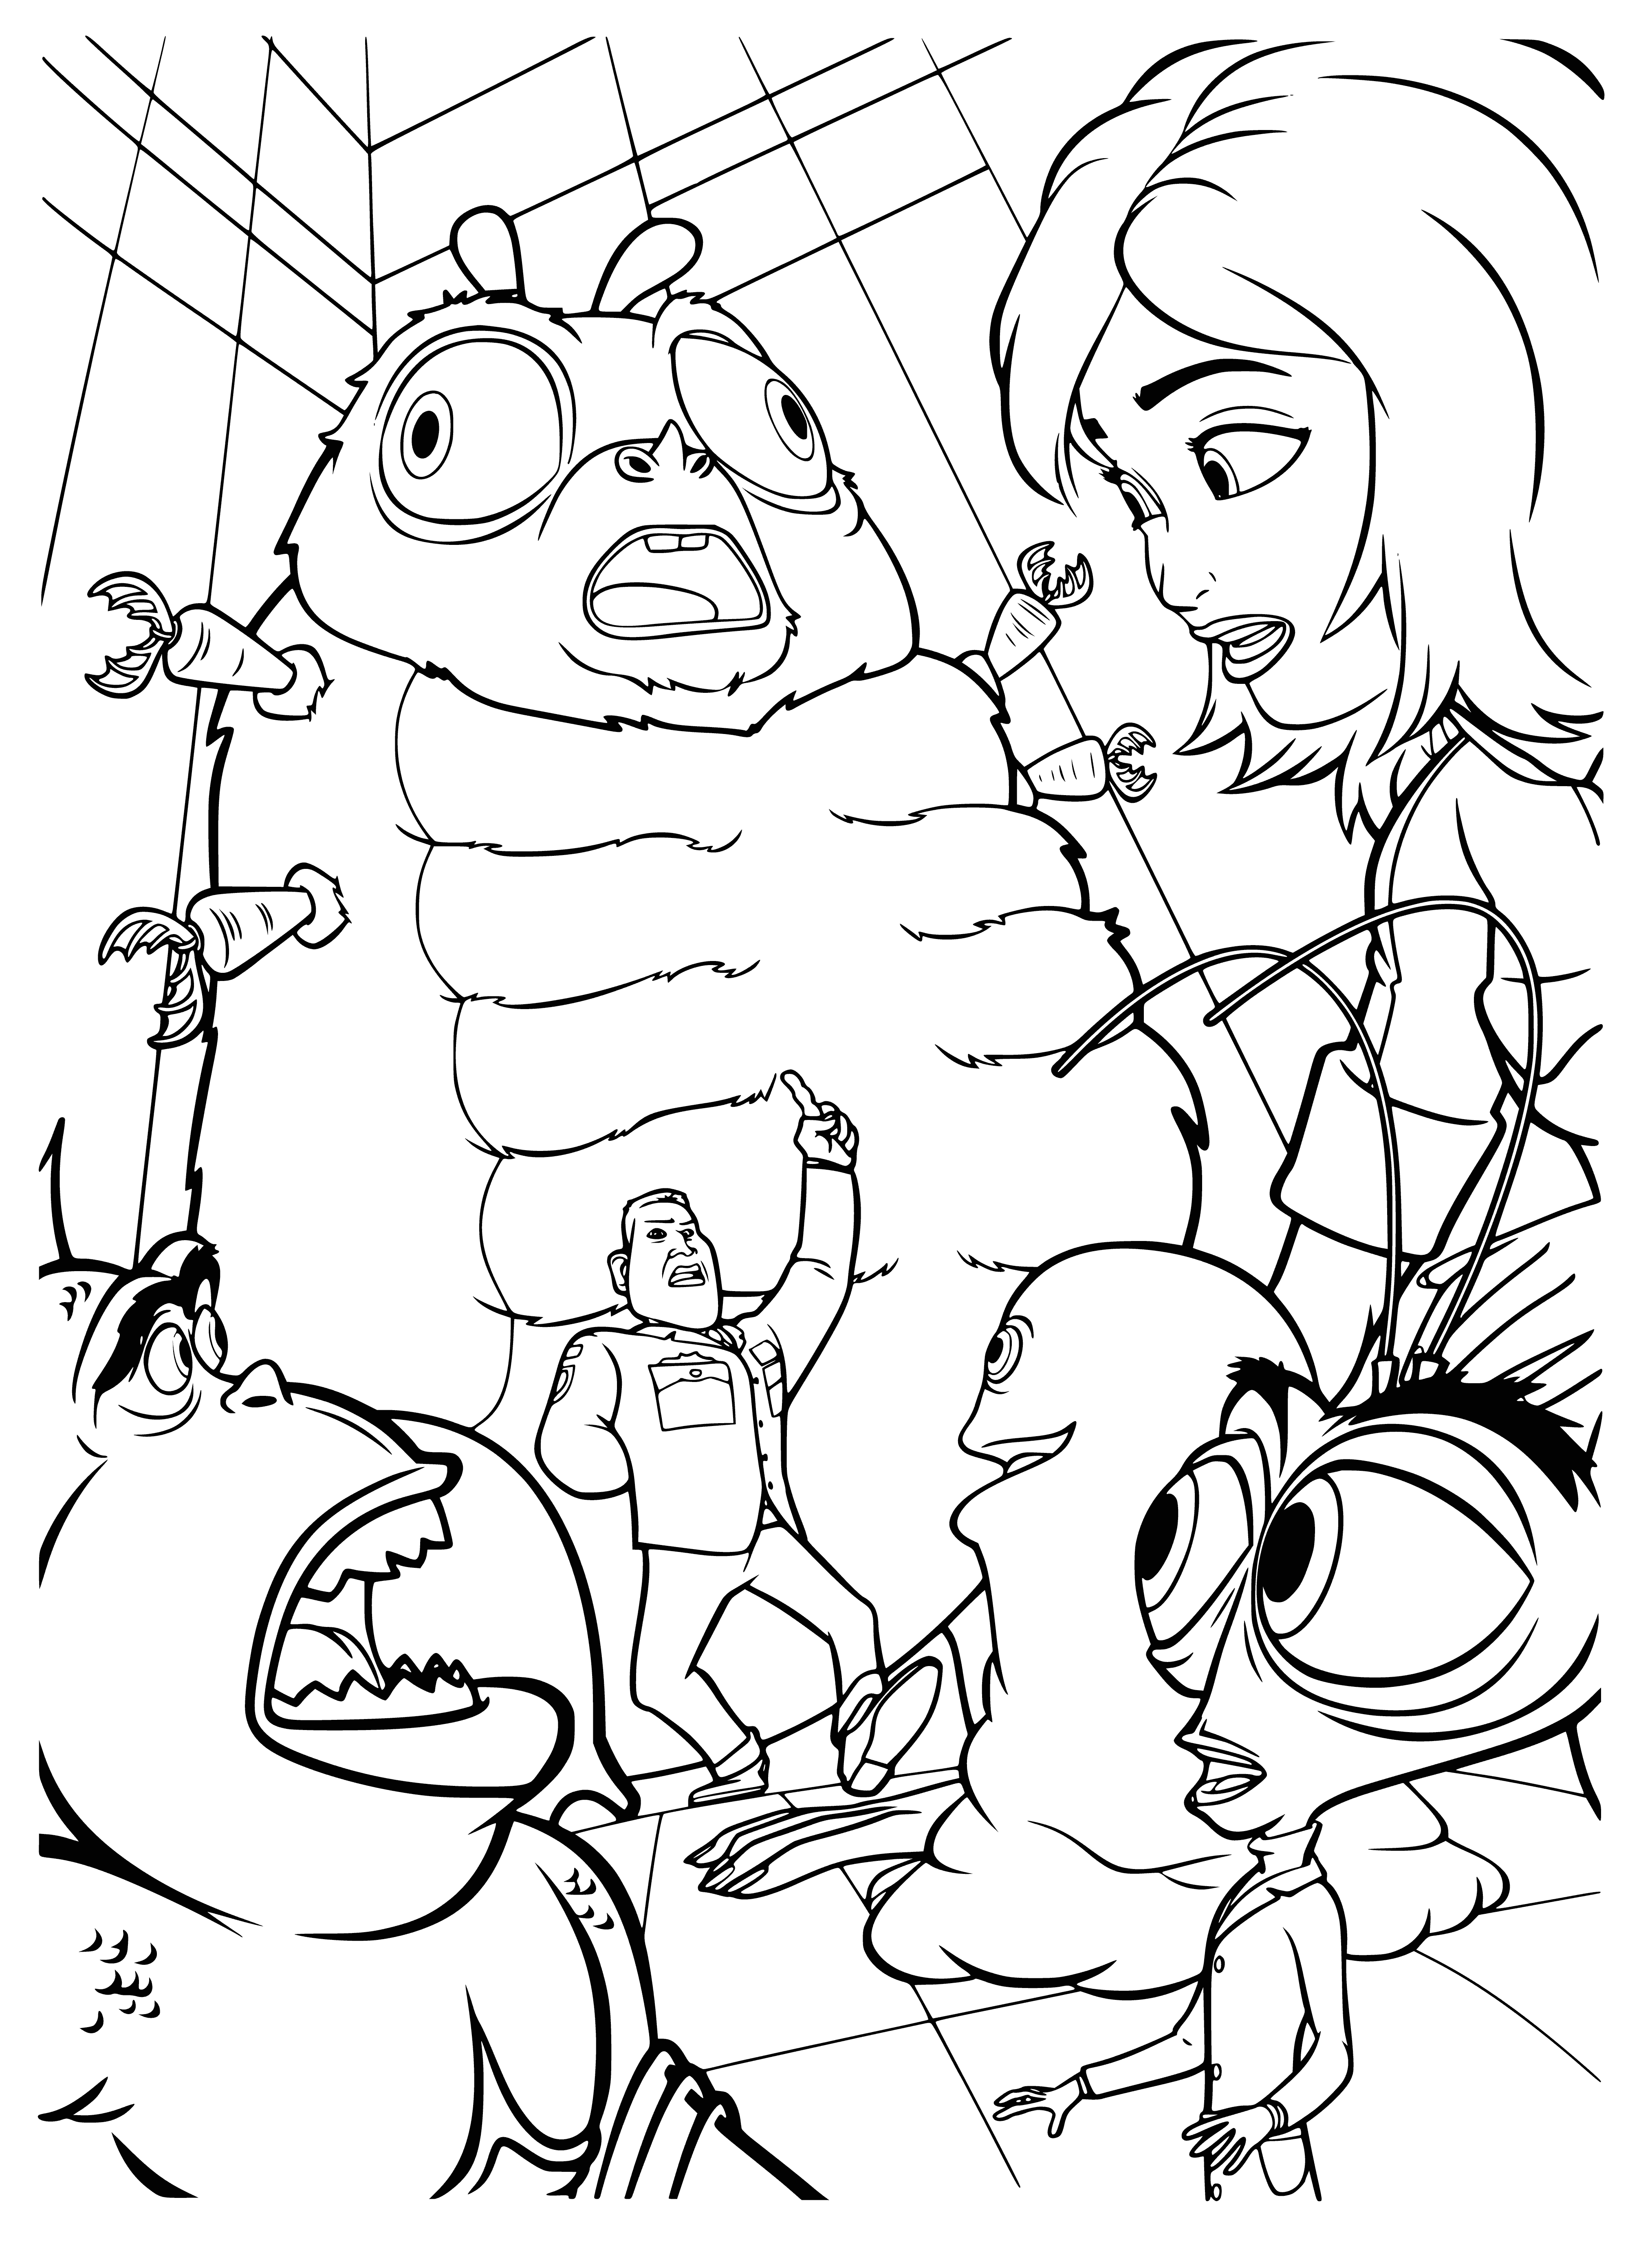 coloring page: Giant alien holding a small monster, with a city & moon behind. Monster looks scared.